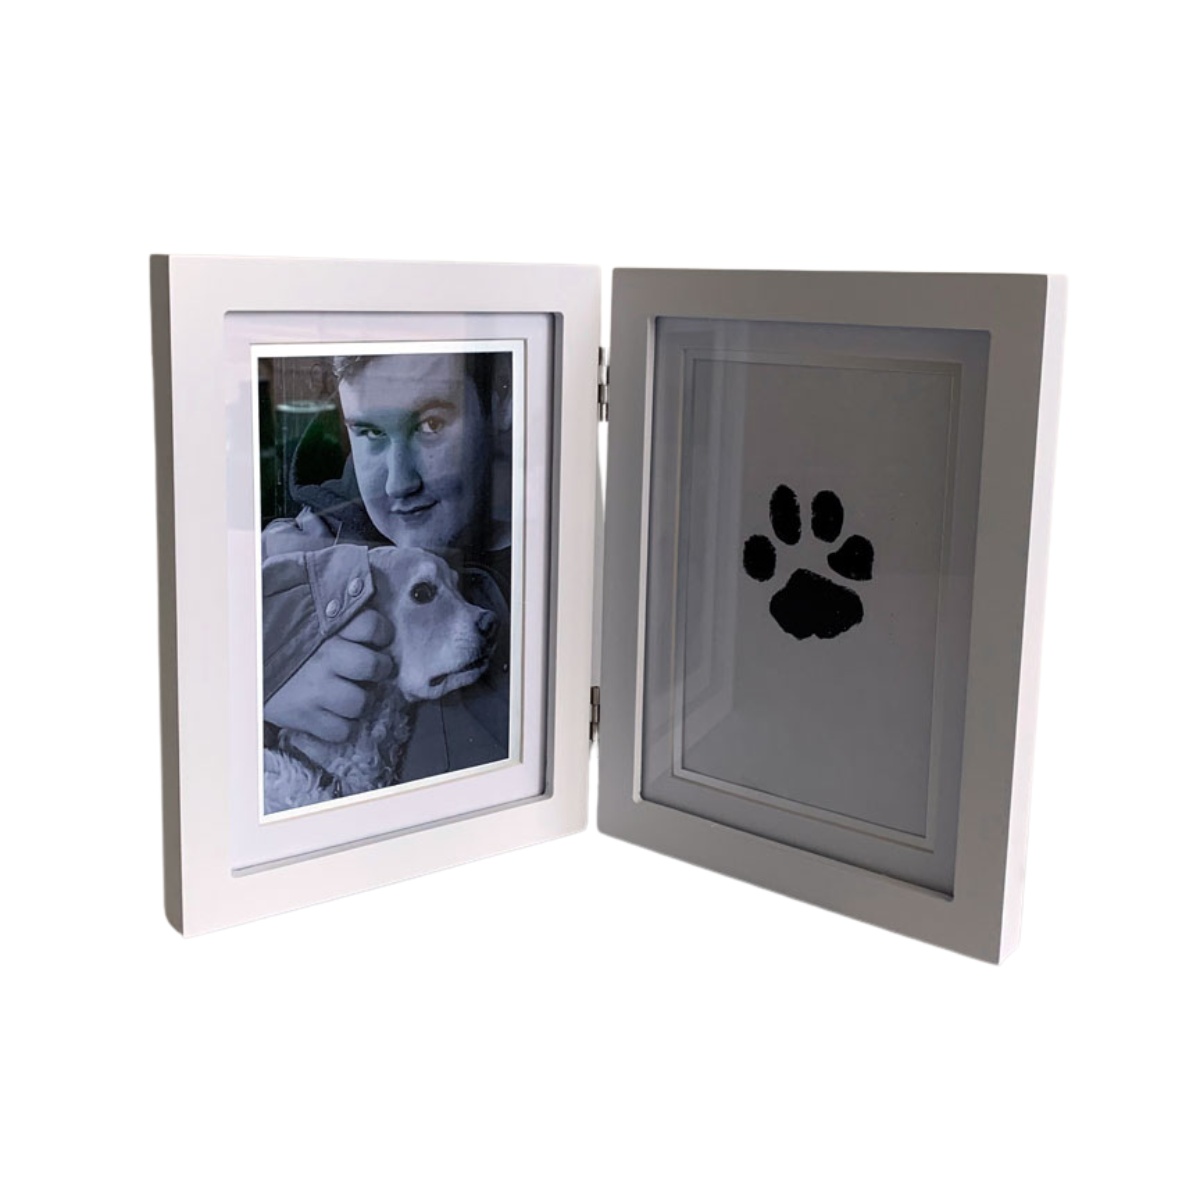 Framed Ink - 2 sided frame with Ink Paw Print and Photo.